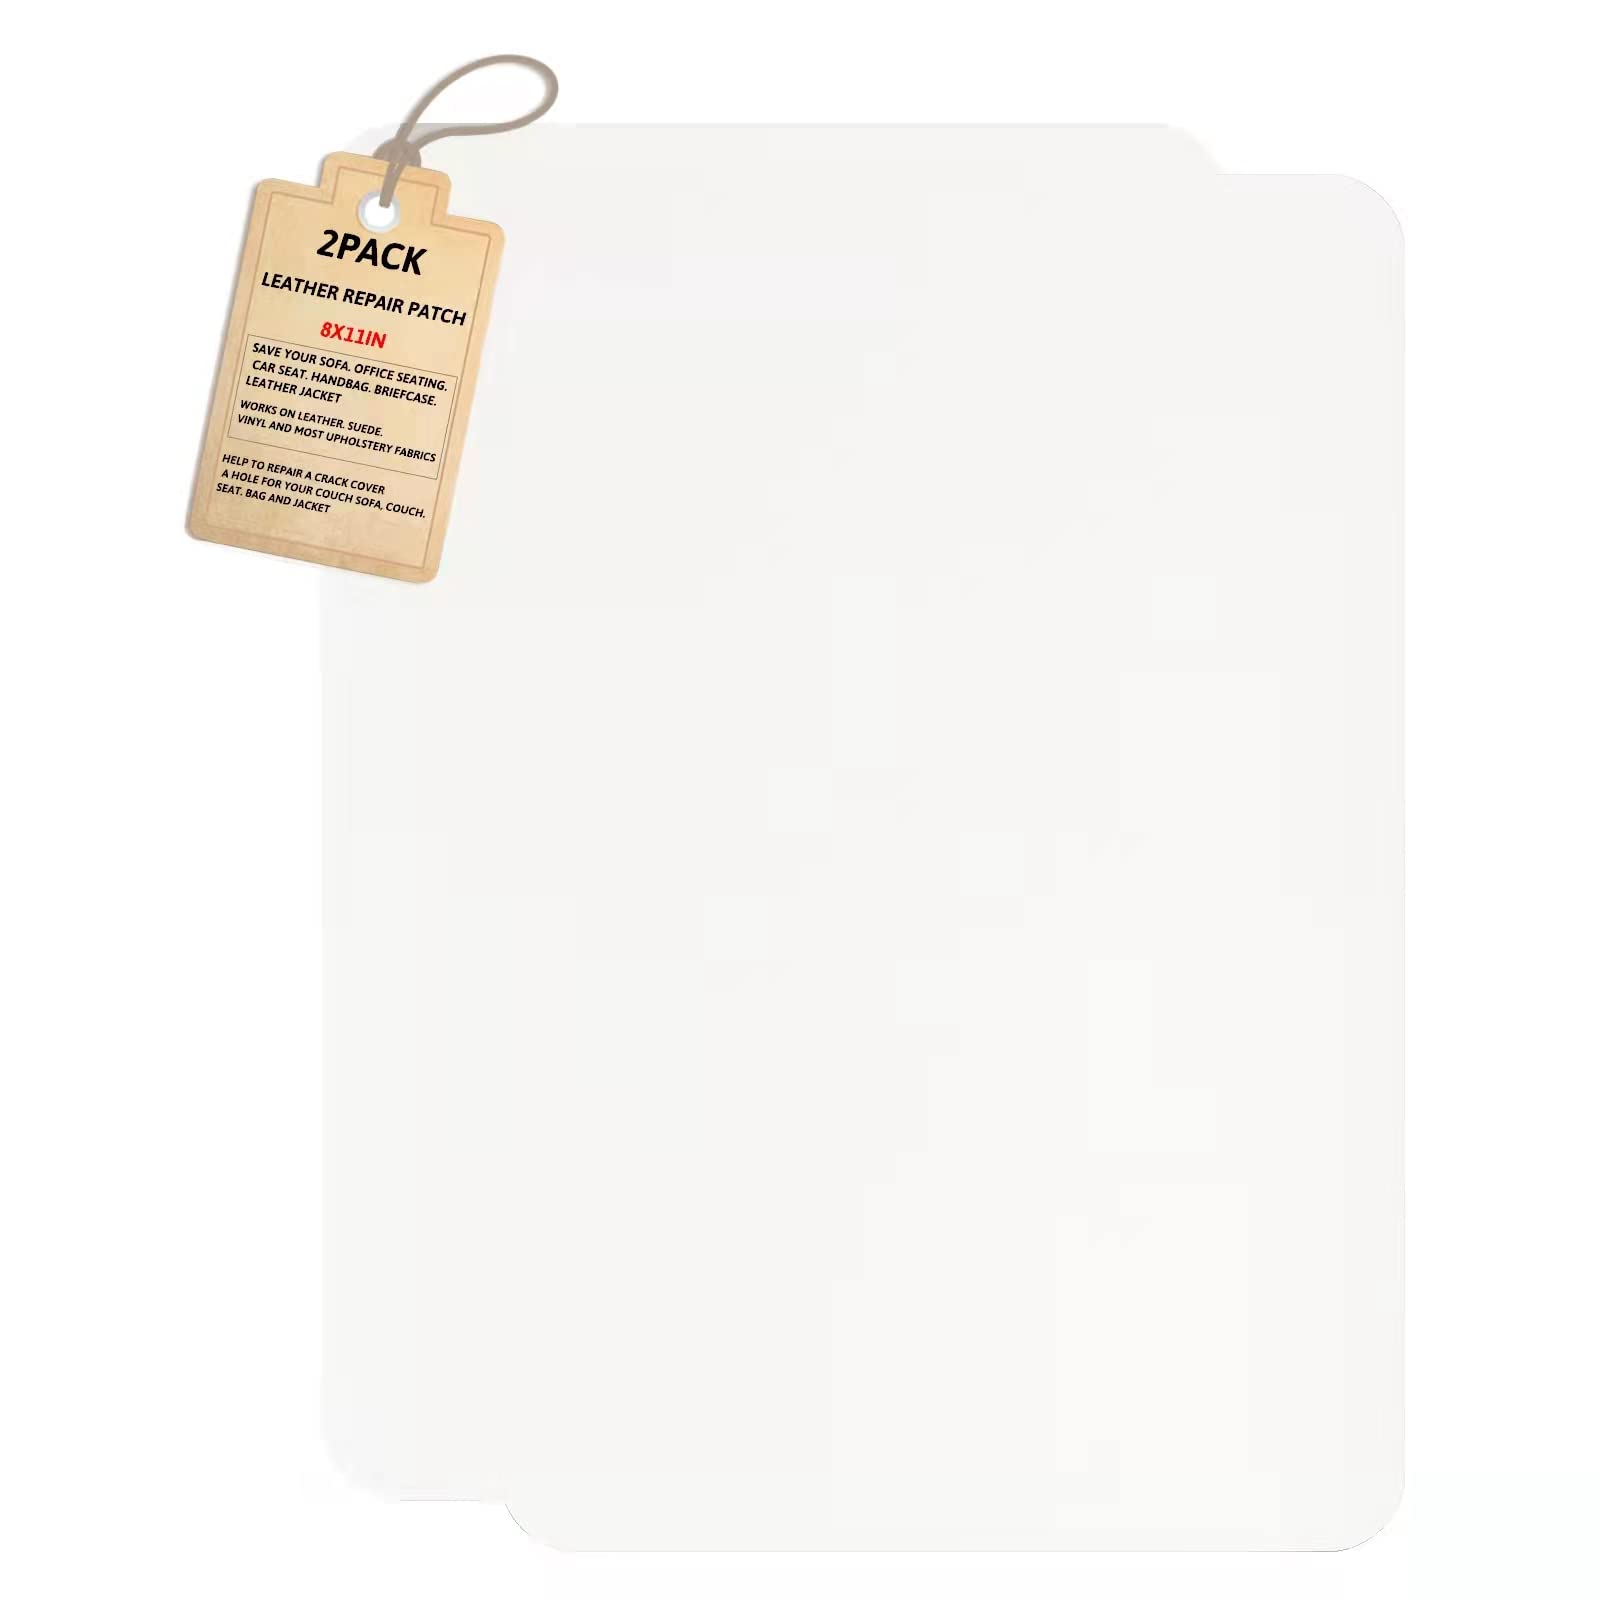  White Leather Repair Kit for Couches Suede, Leather